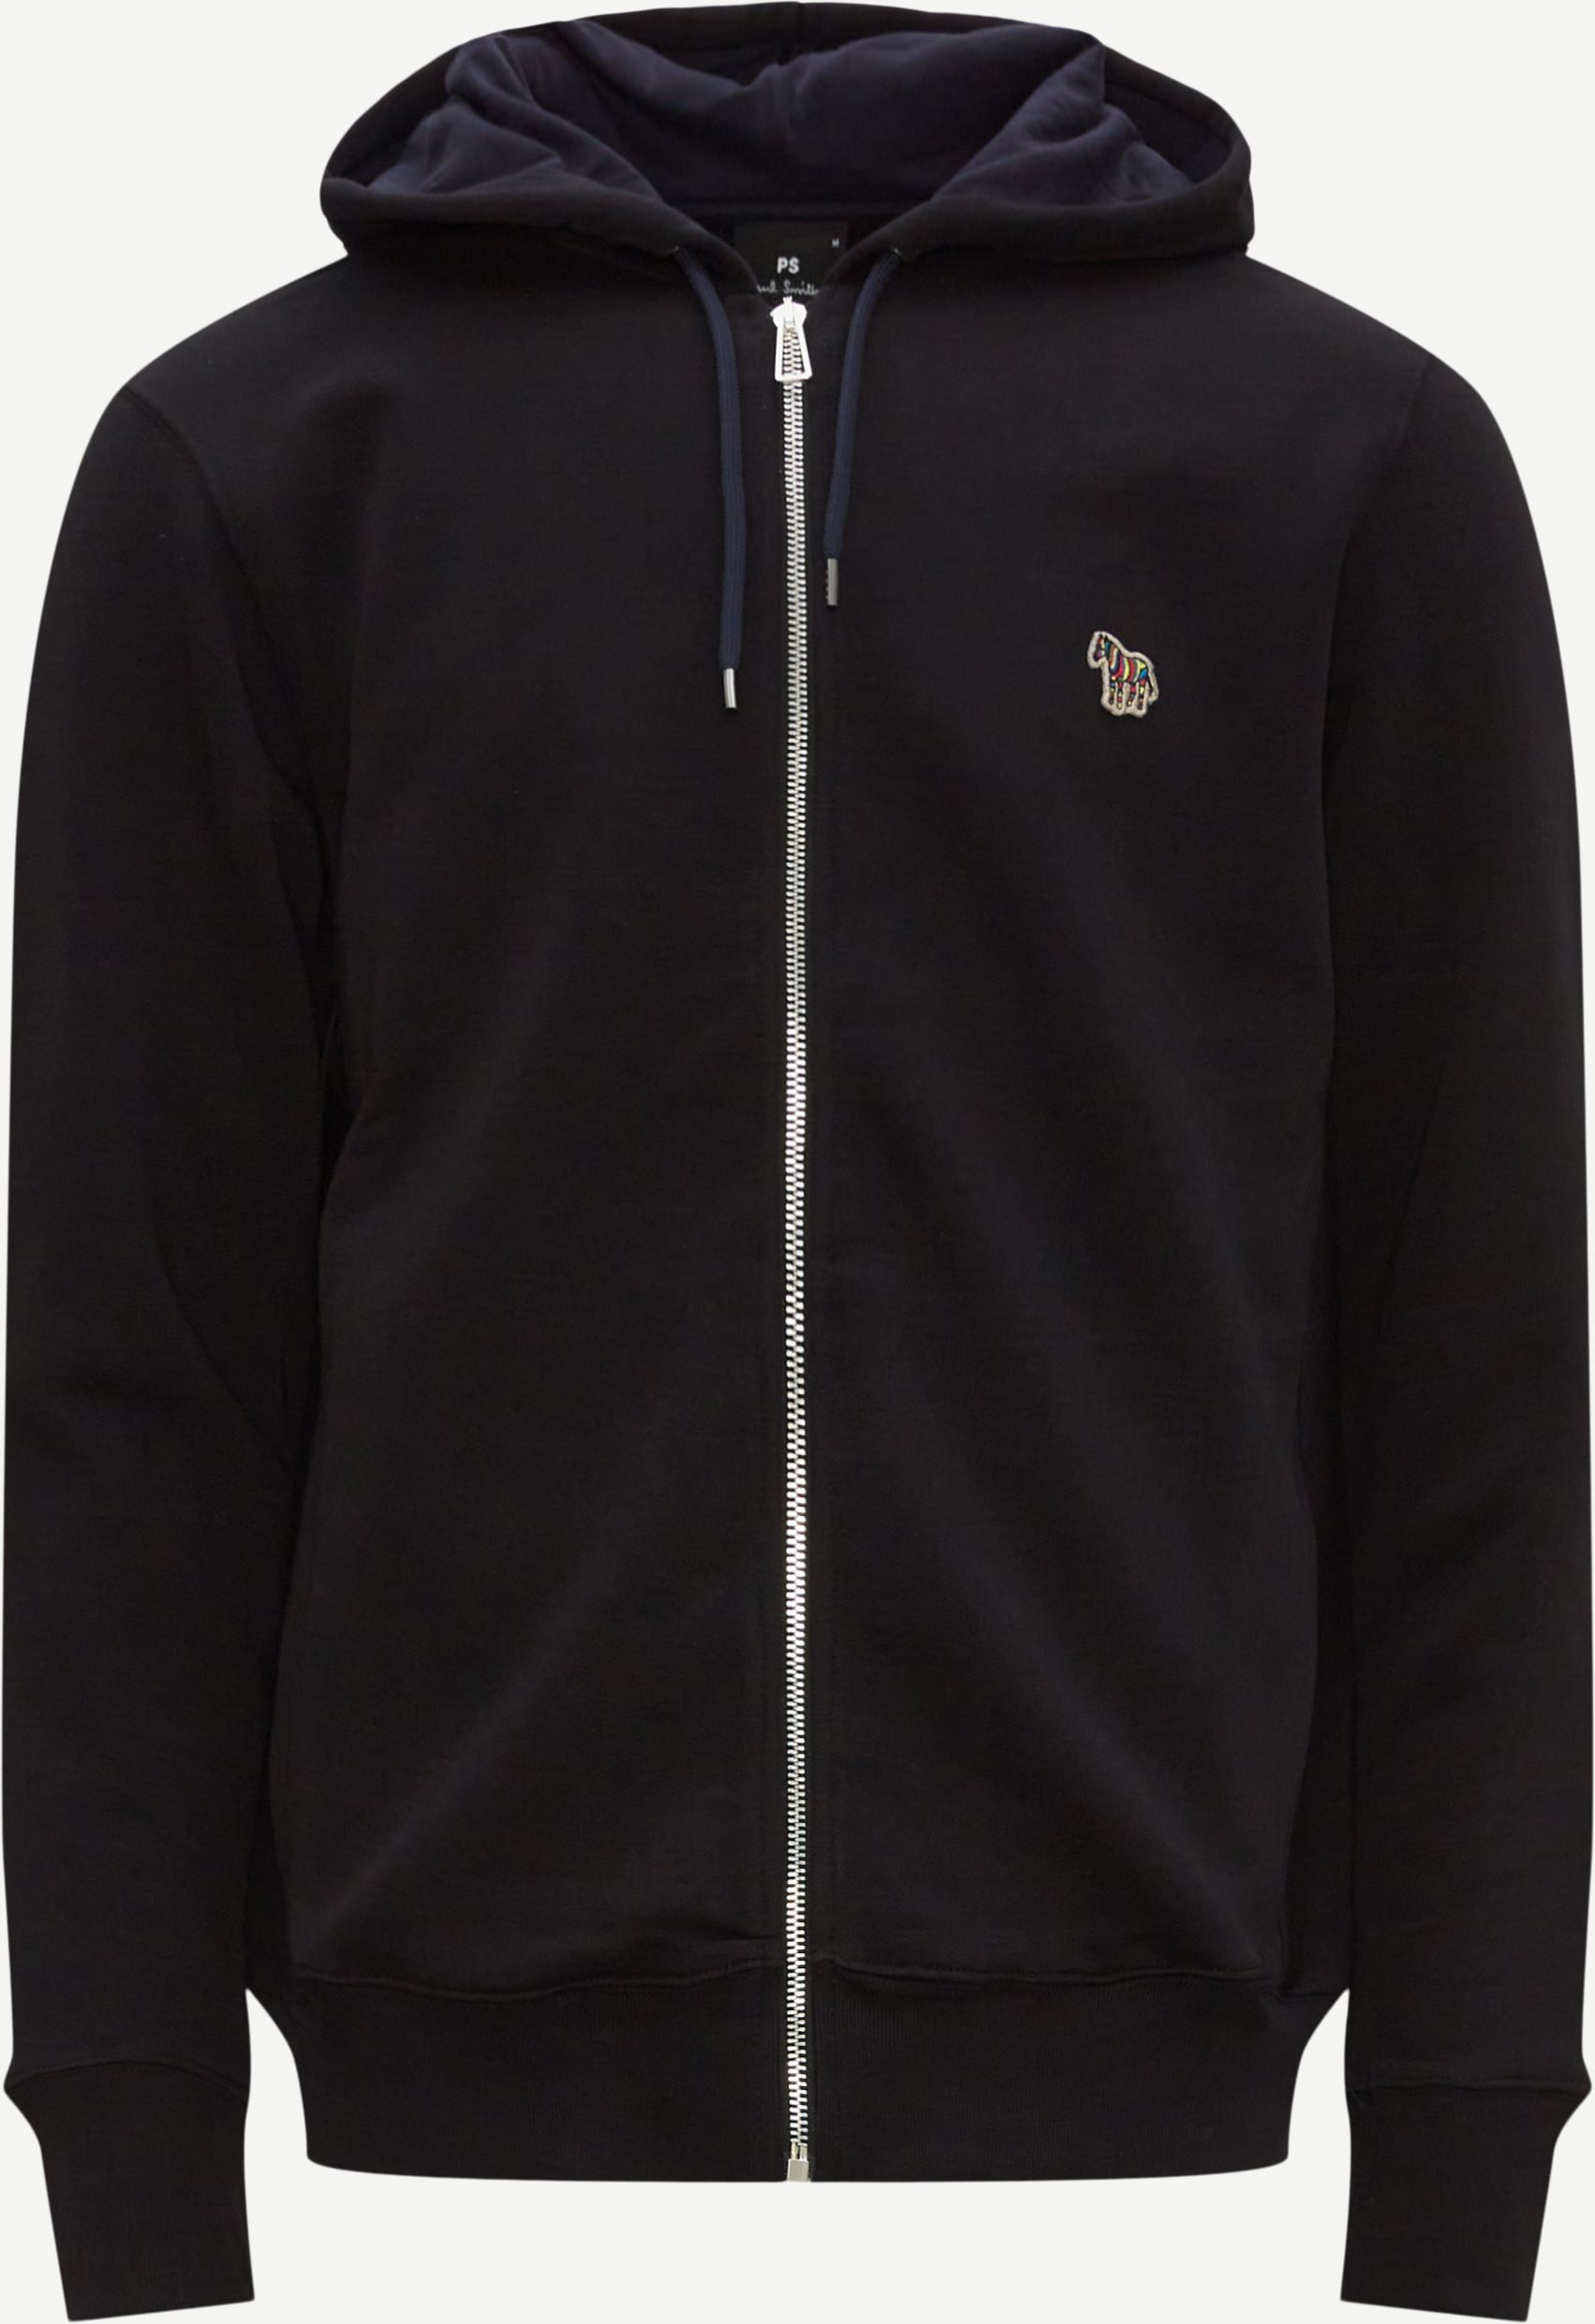 Sweatshirts for men | Many styles online at Kaufmann